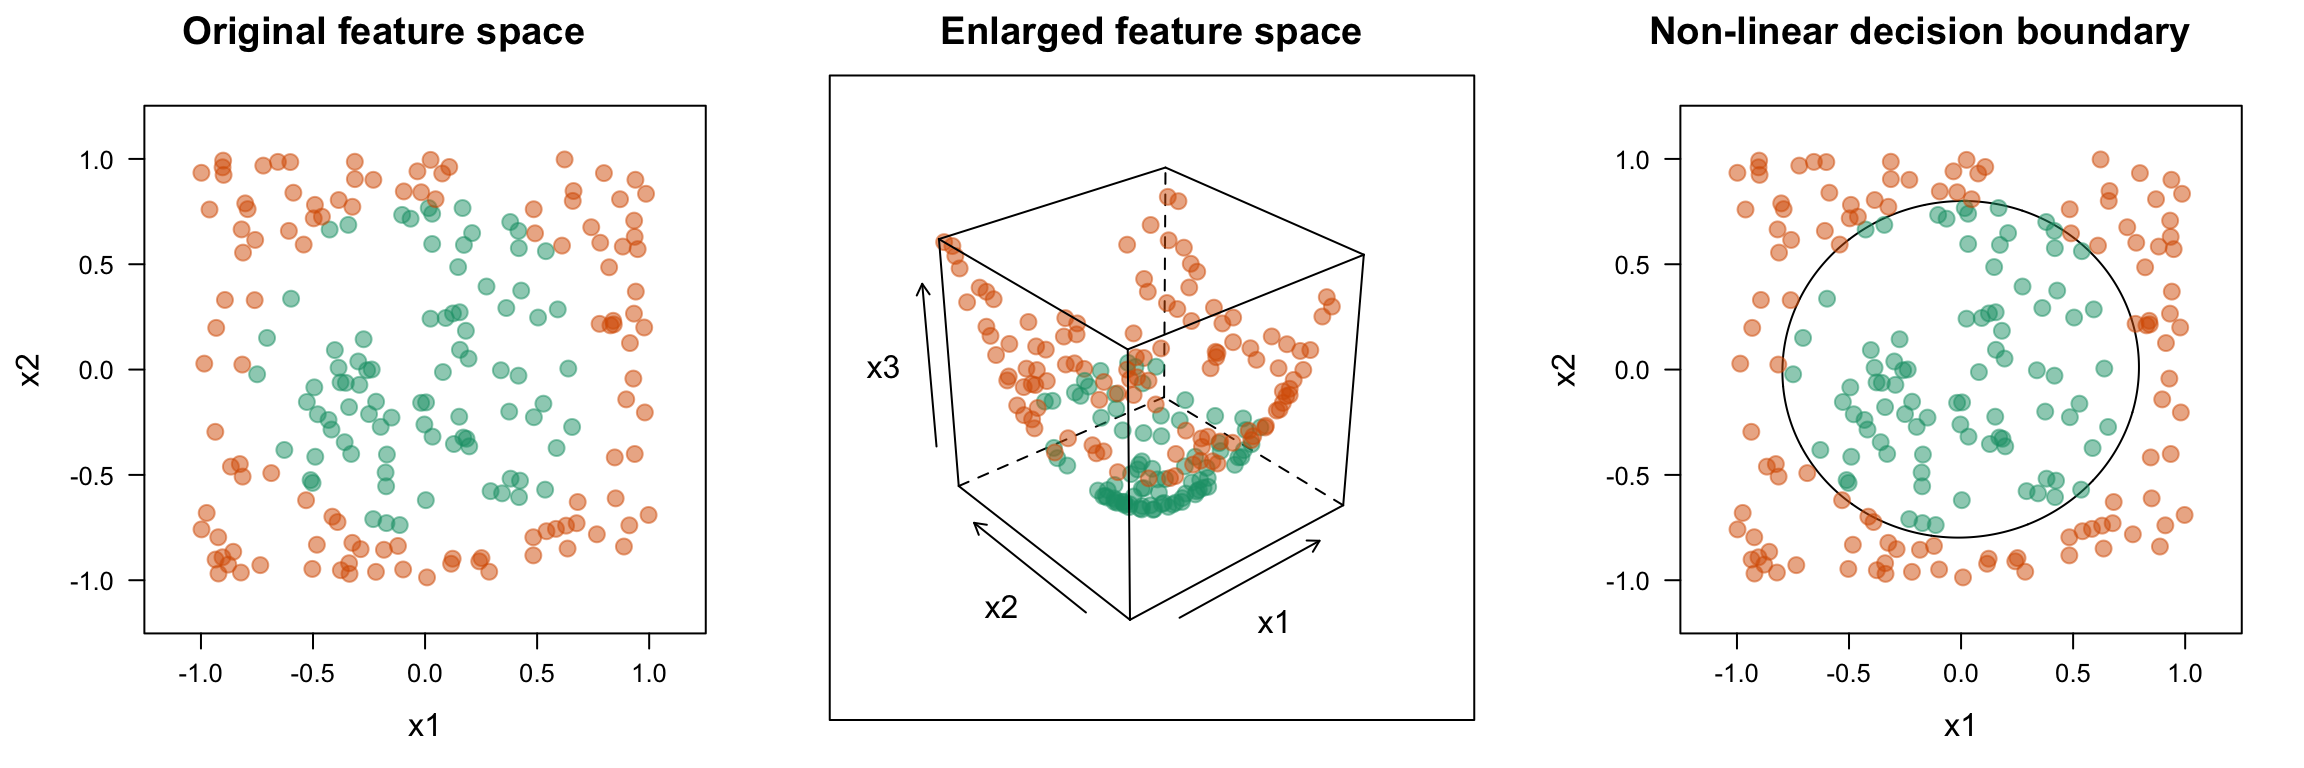 Simulated nested circle data. _Left:_ The two classes in the original (2-D) feature space. _Middle:_ The two classes in the enlarged (3-D) feature space. _Right:_ The decision boundary from the HMC in the enlarged feature space projected back into the original feature space.